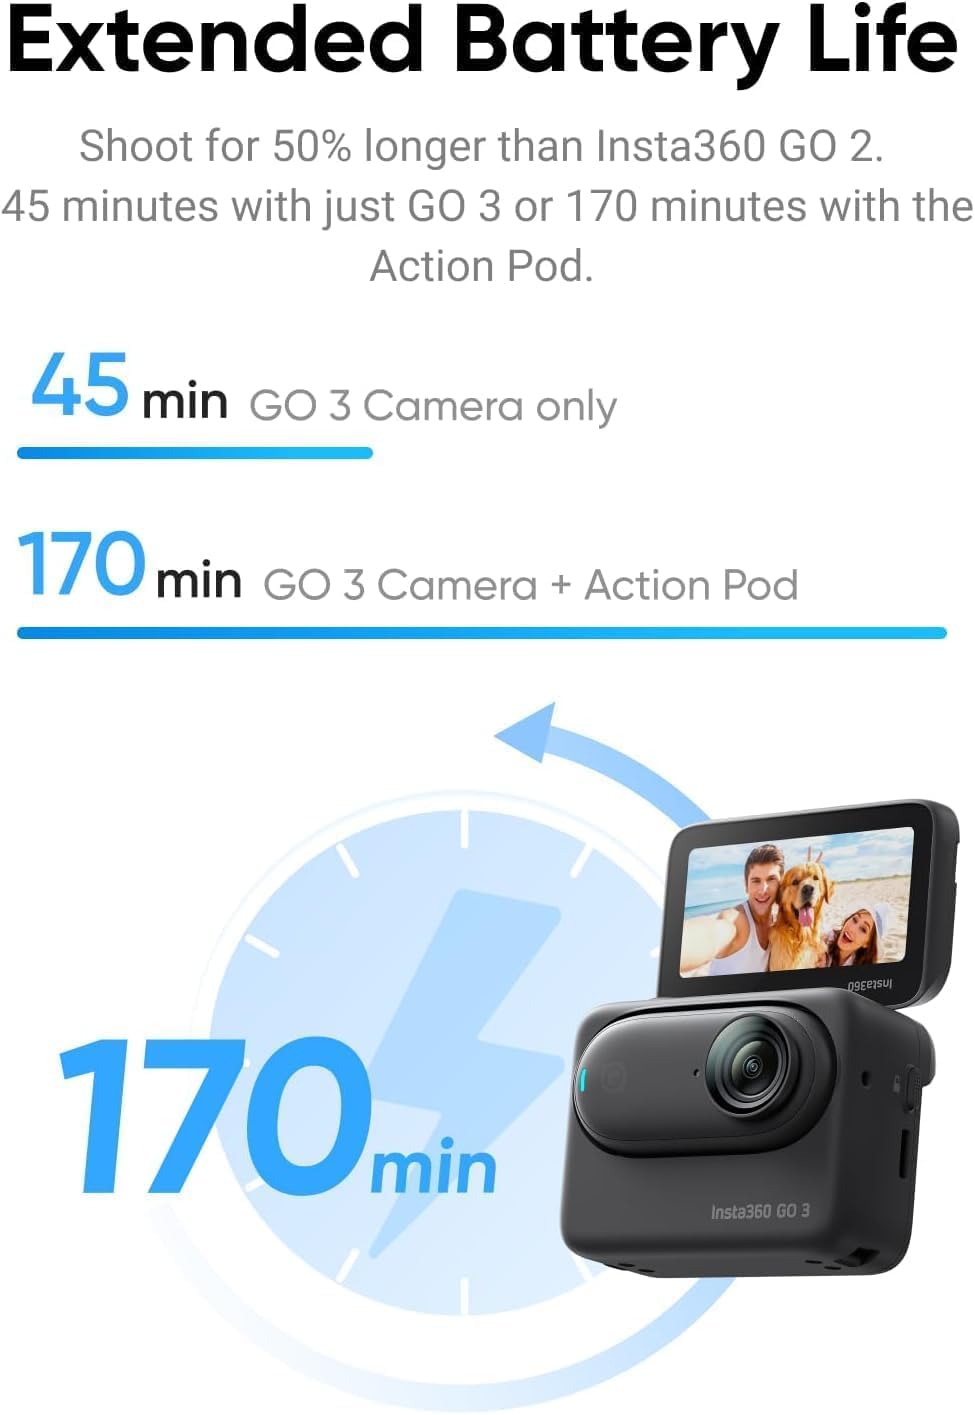 Insta360 GO 3 Midnight Black (64GB) – Small & Lightweight Action Camera, Portable and Versatile, Hands-Free POV, Mount Anywhere, Stabilization, Multifunctional Action Pod, Waterproof